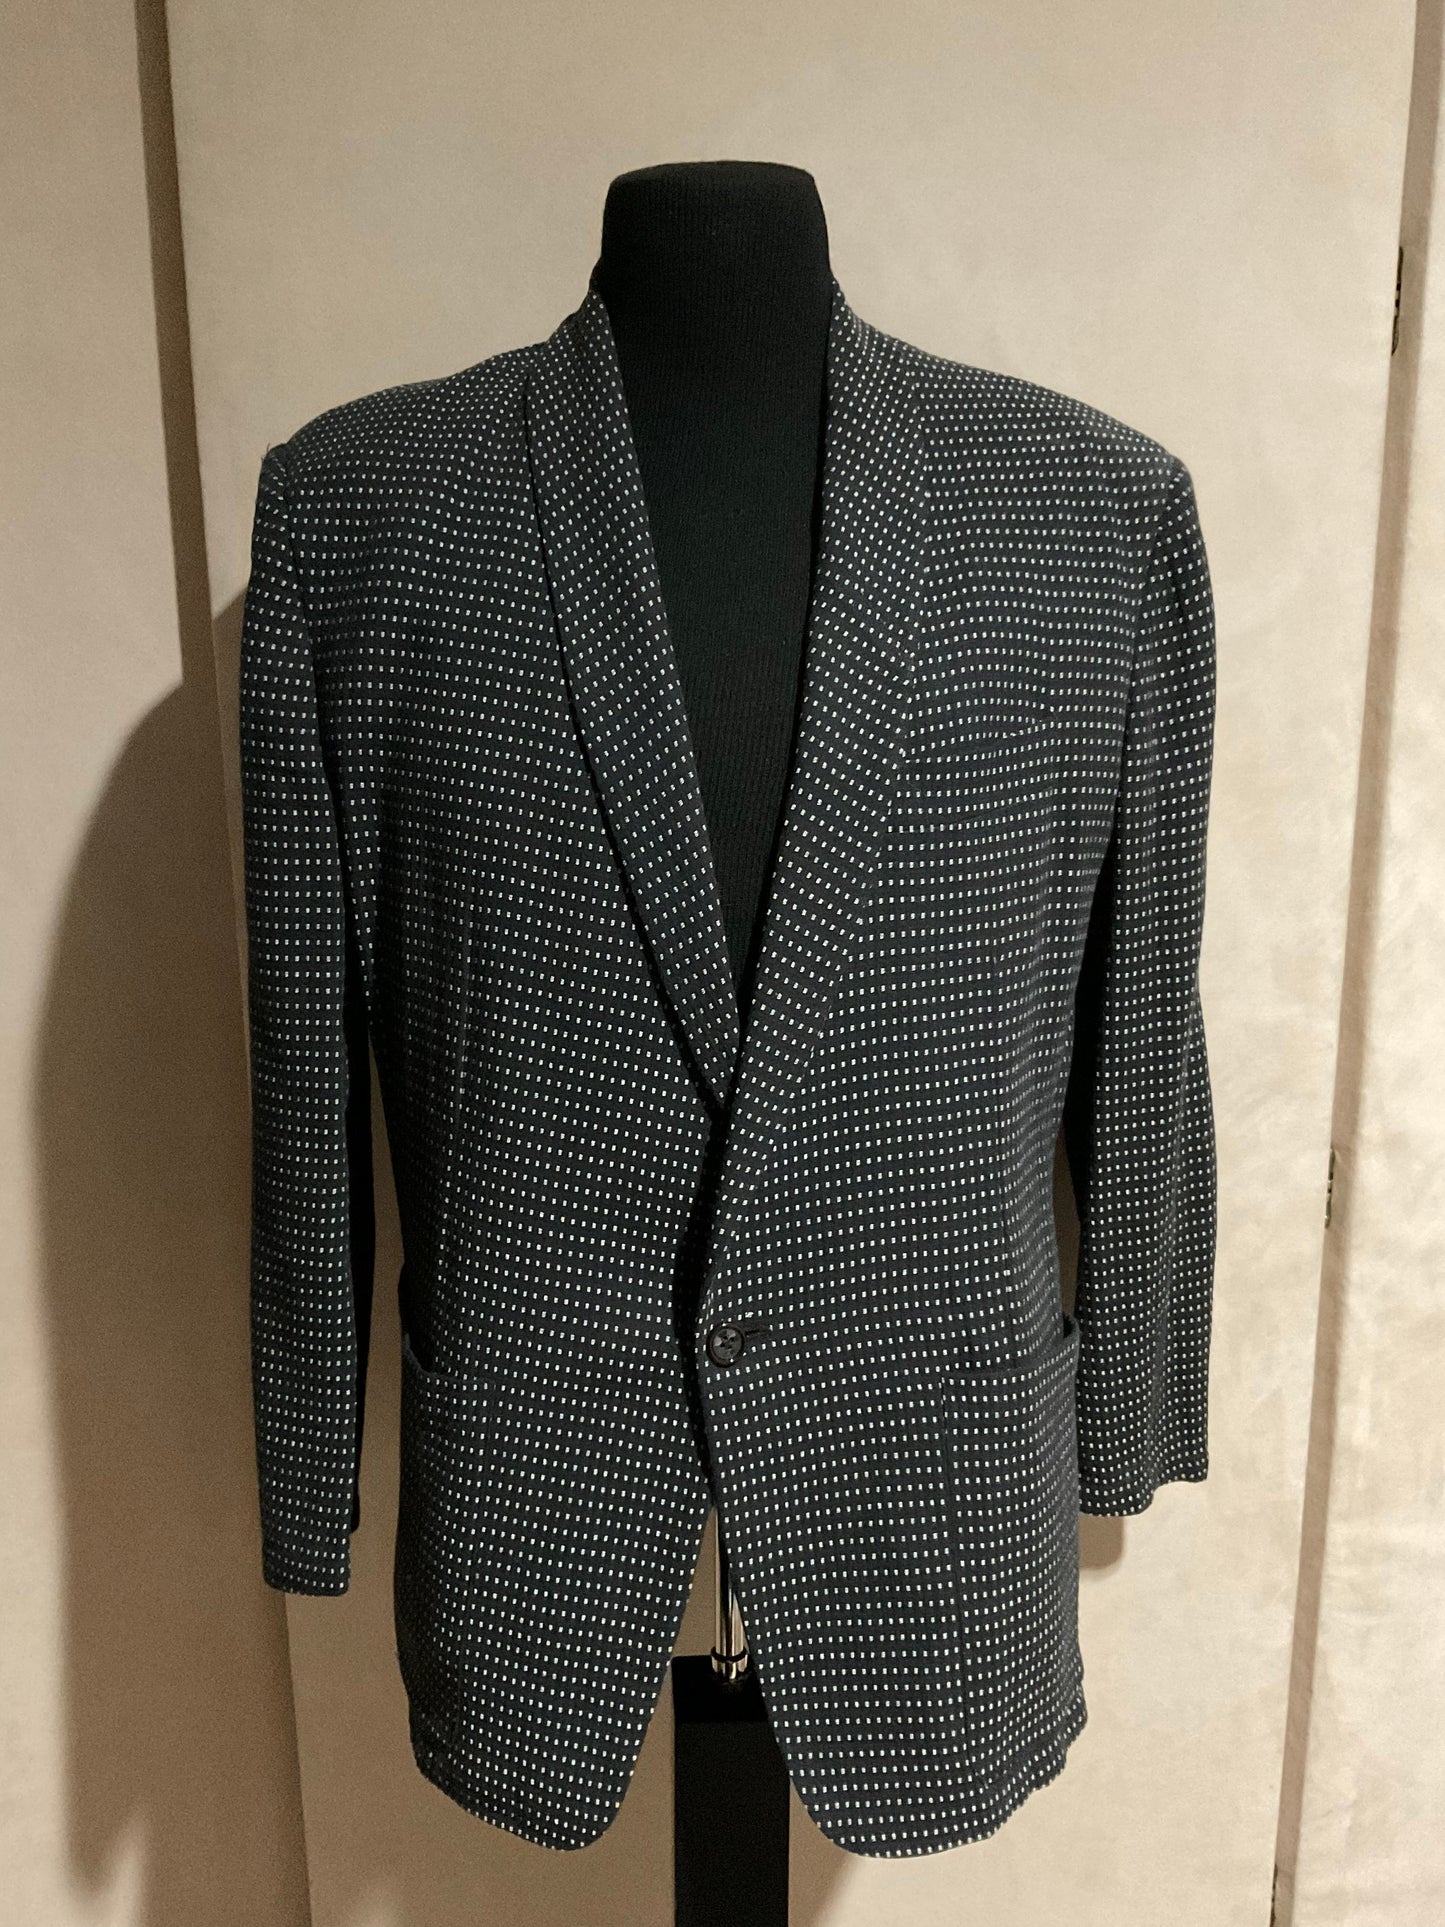 R P SPORT JACKET / BLACK & WHITE / UNCONSTRUCTED / MEDIUM / MADE IN ITALY